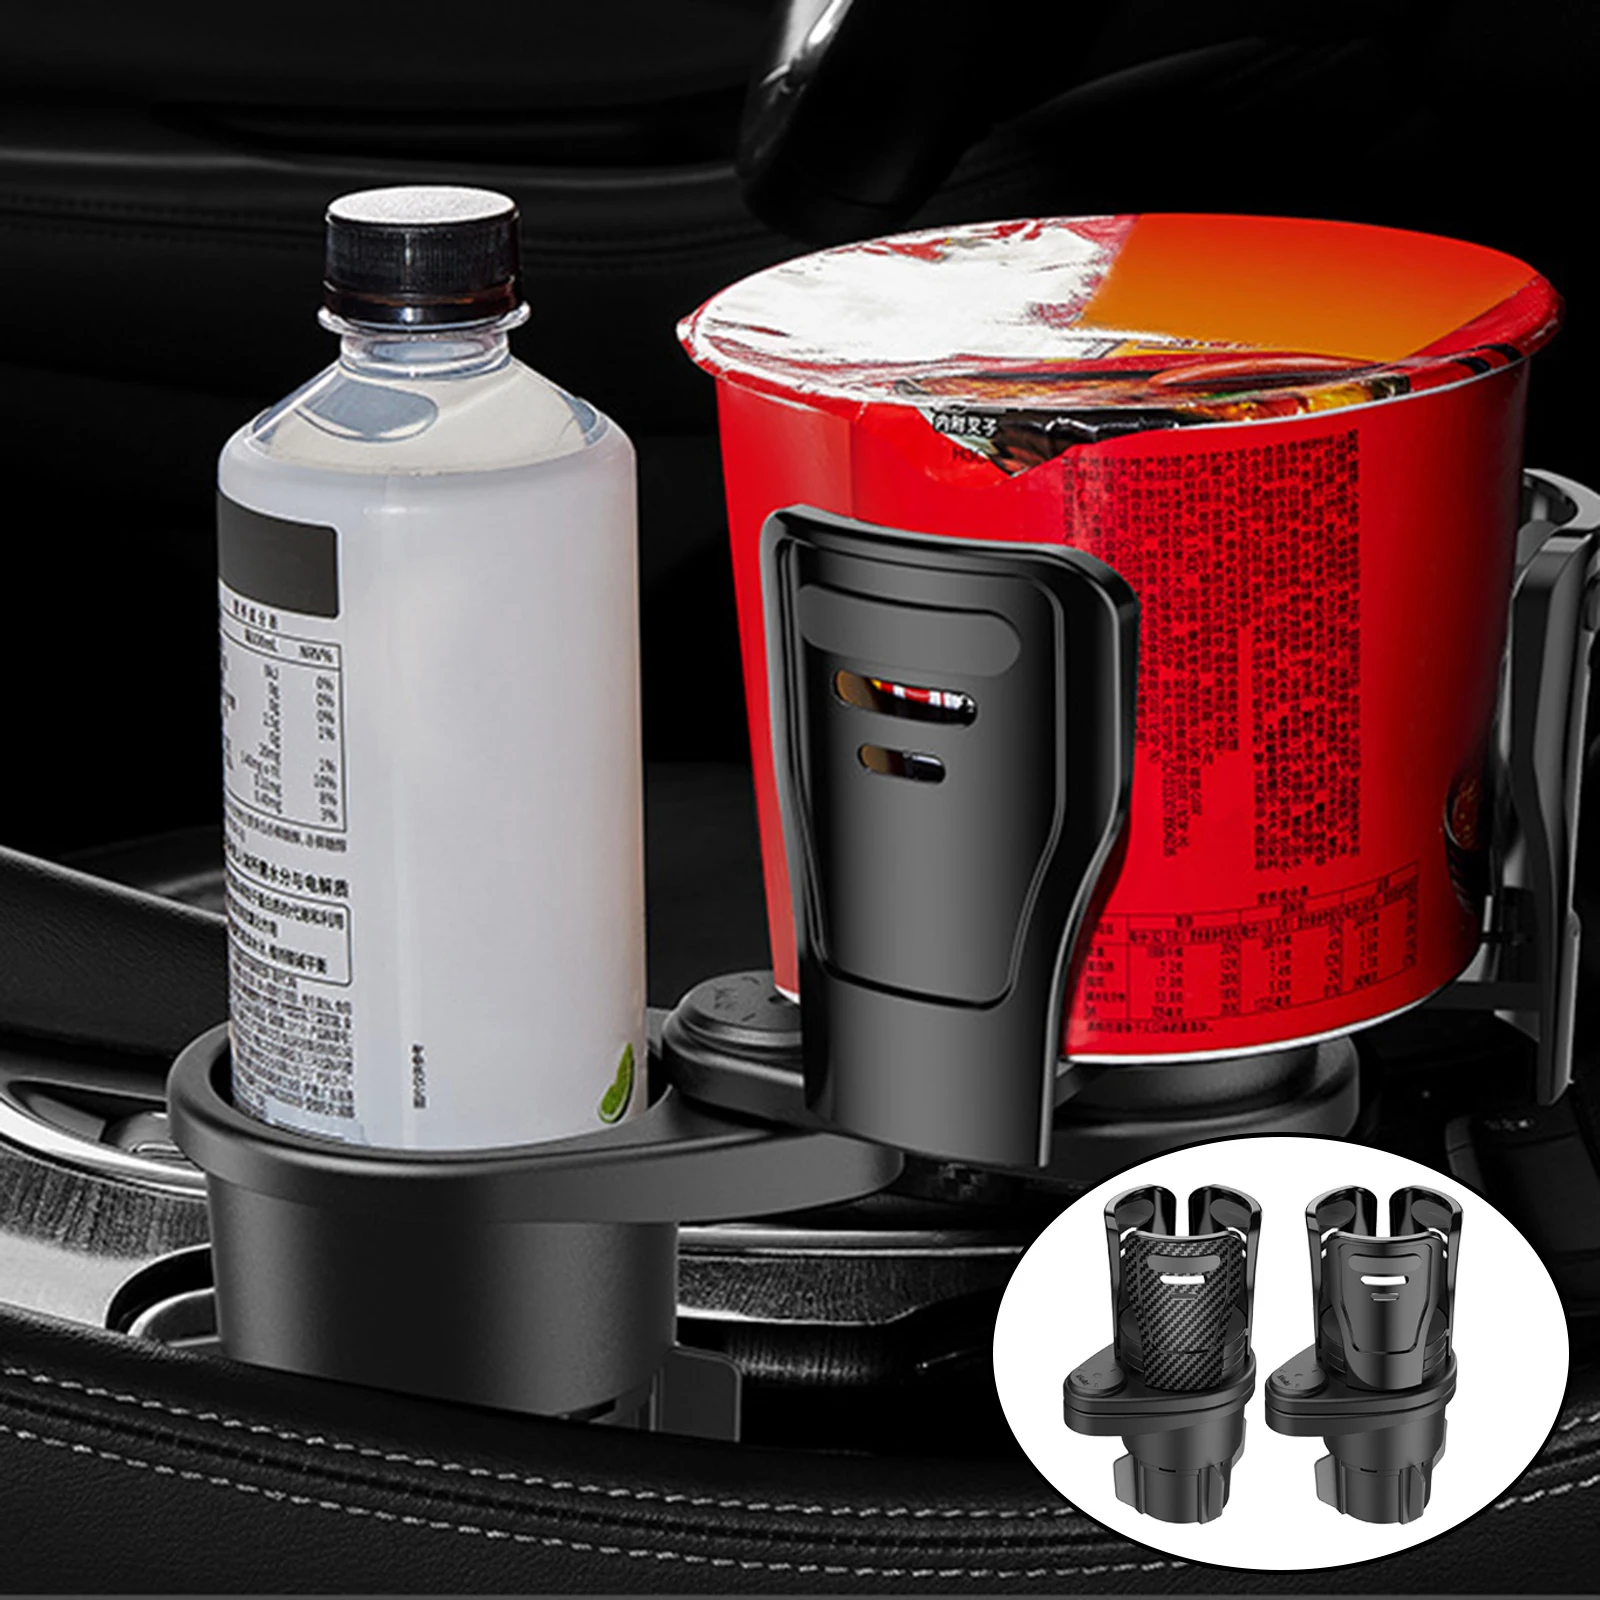 Car Cup Holder Expander 2 in 1 Cups Stand 360 Rotating Adjustable Base Automotive Universal Bottle Organizers for Most Cup